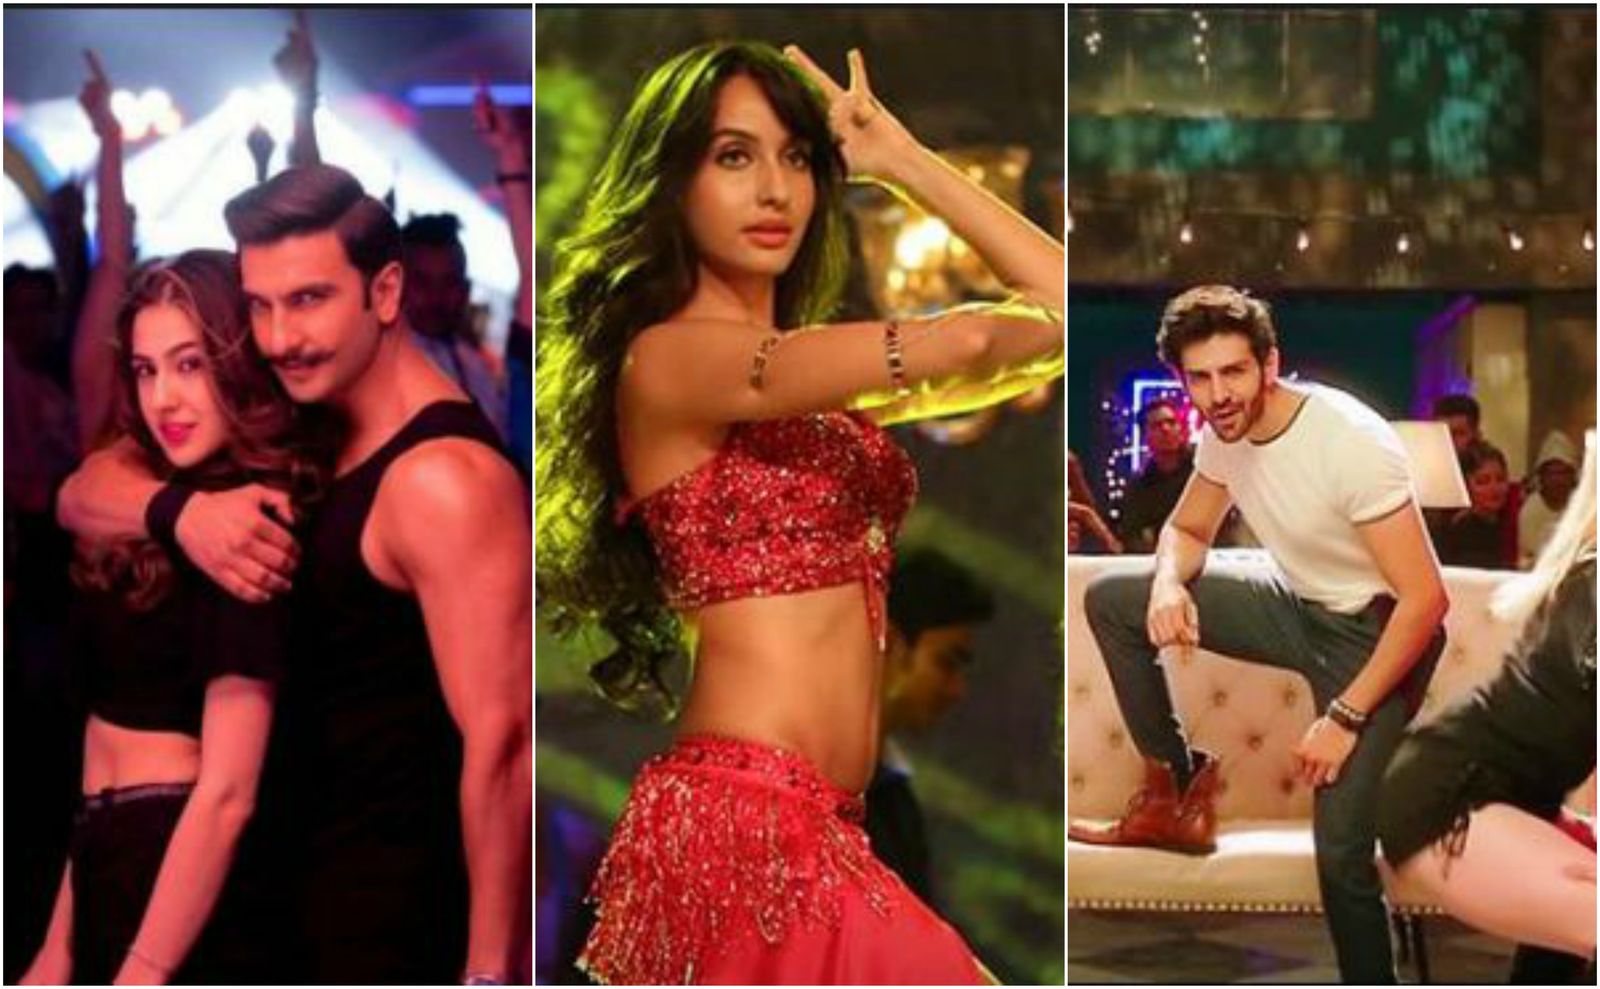 Top 20 Dance Songs Hits Of 2018 - That Made Us Dance Till We Dropped